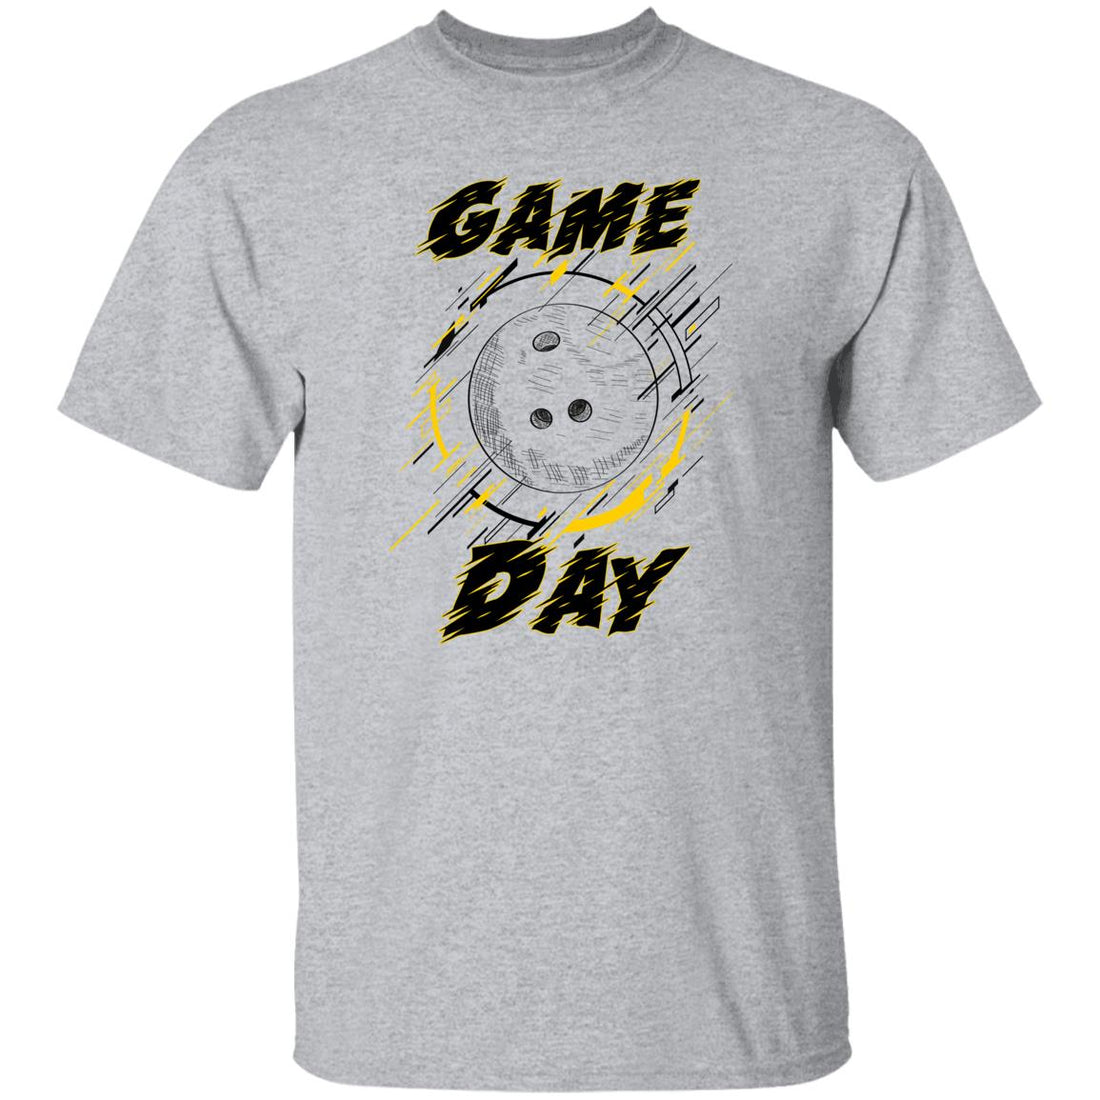 Game Day Bowling T-Shirt - T-Shirts - Positively Sassy - Game Day Bowling T-Shirt